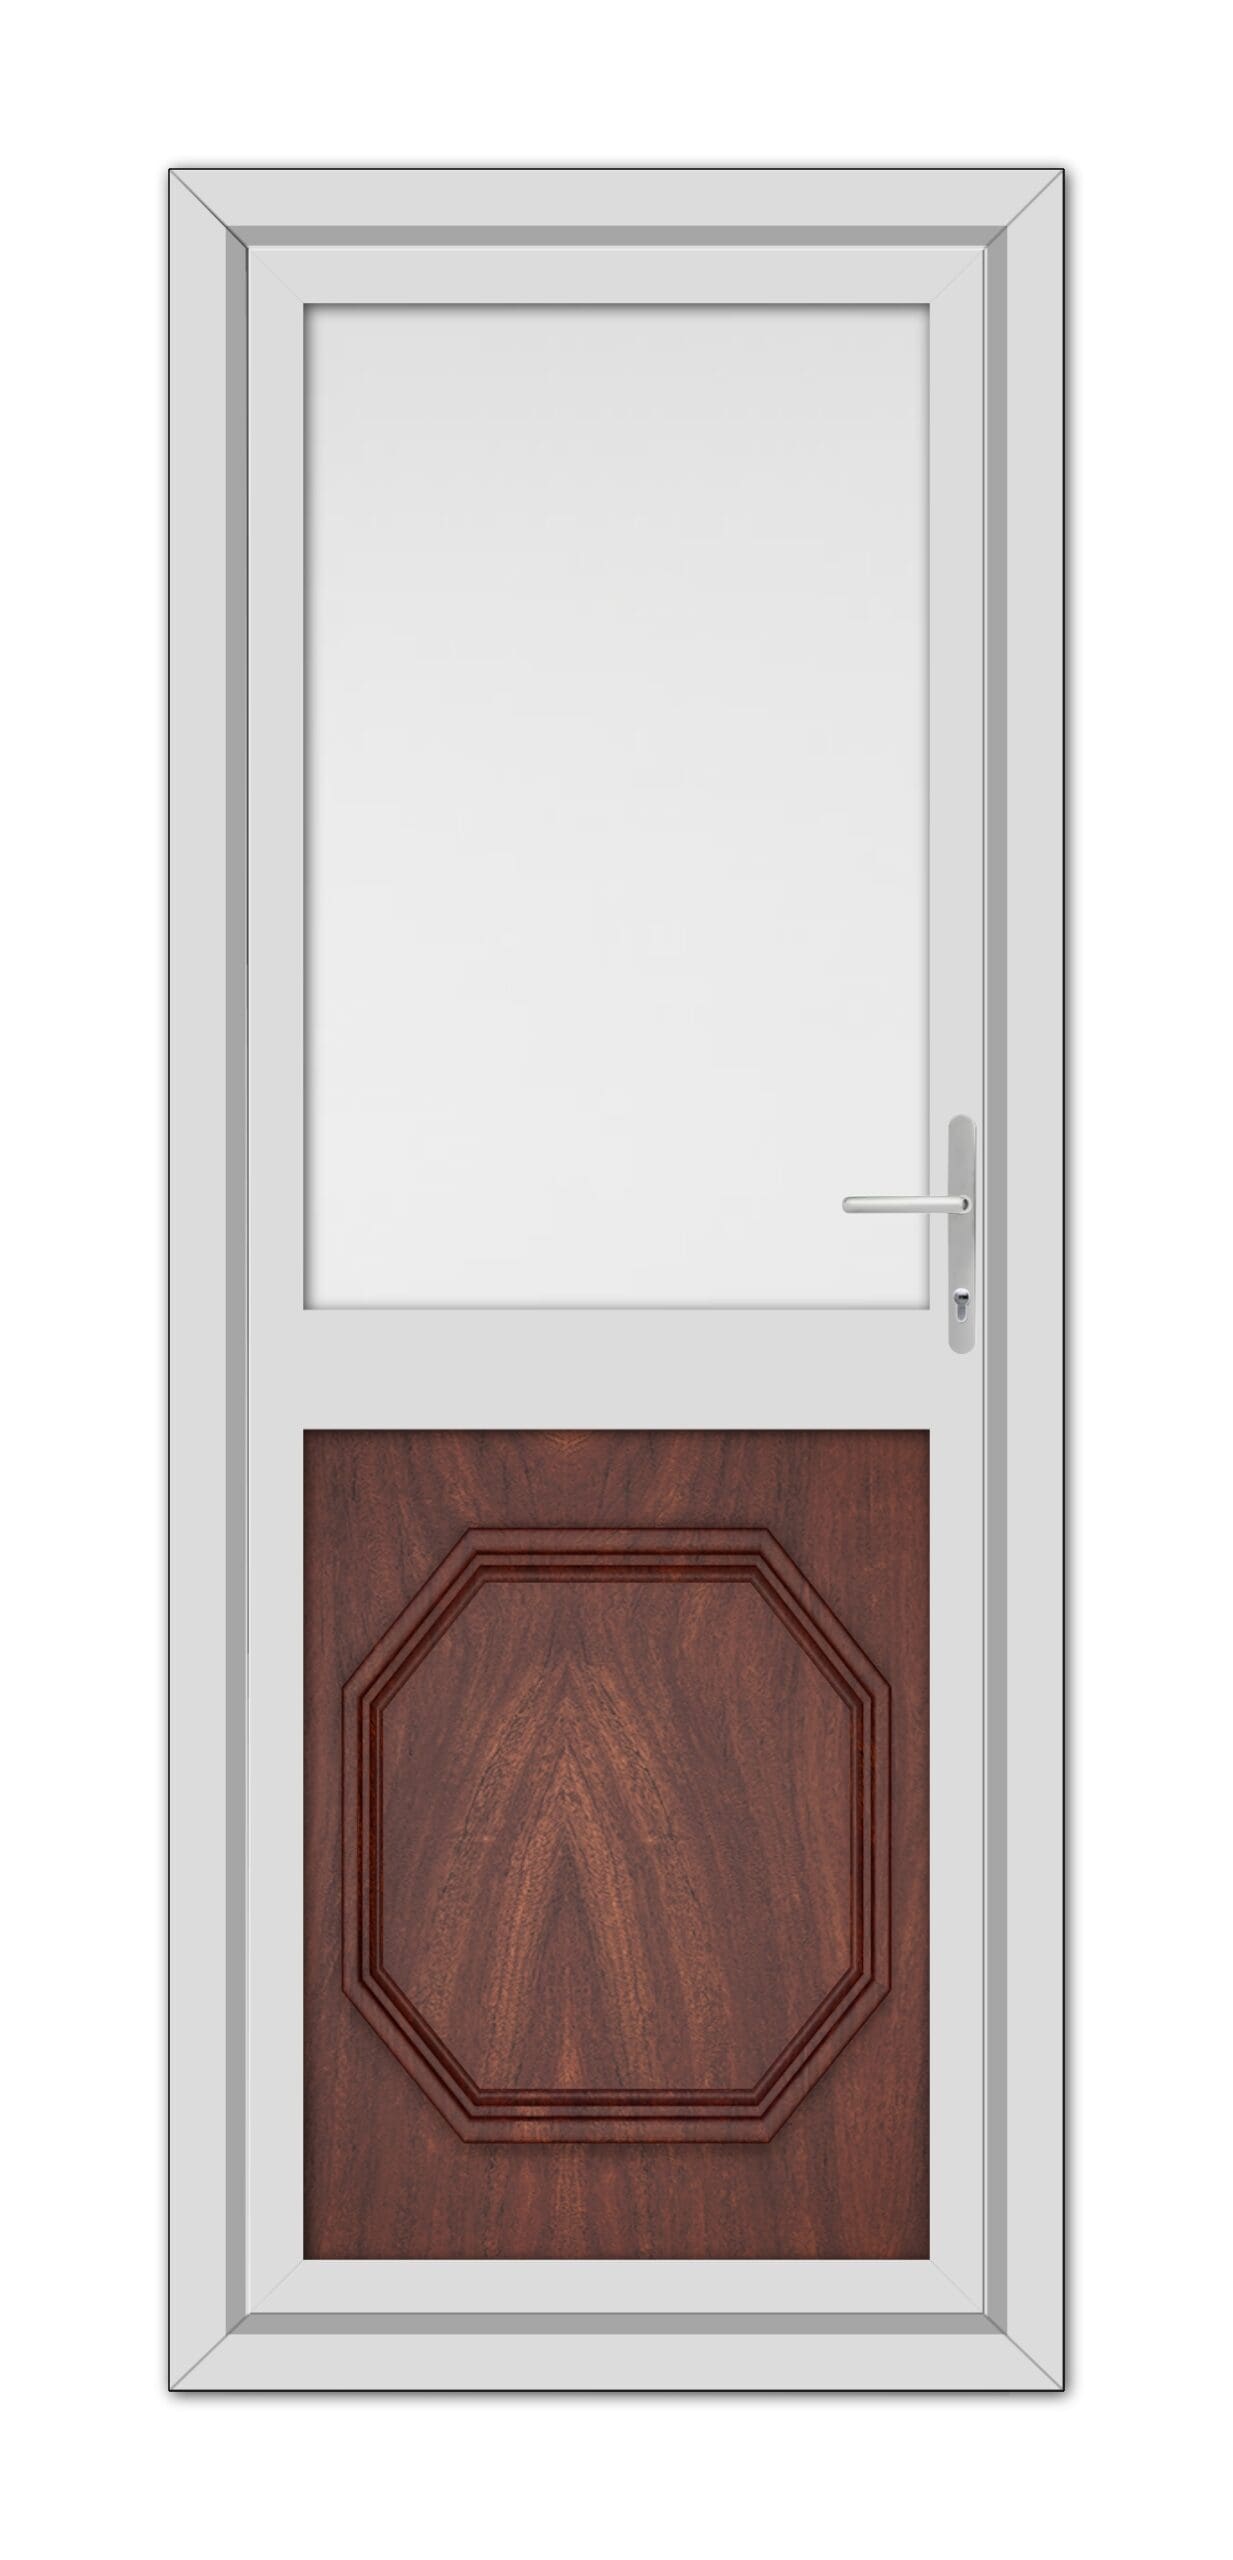 A Rosewood Buckingham Half uPVC Back Door featuring a rectangular upper glass pane and a lower wooden panel with a herringbone pattern, equipped with a modern handle.